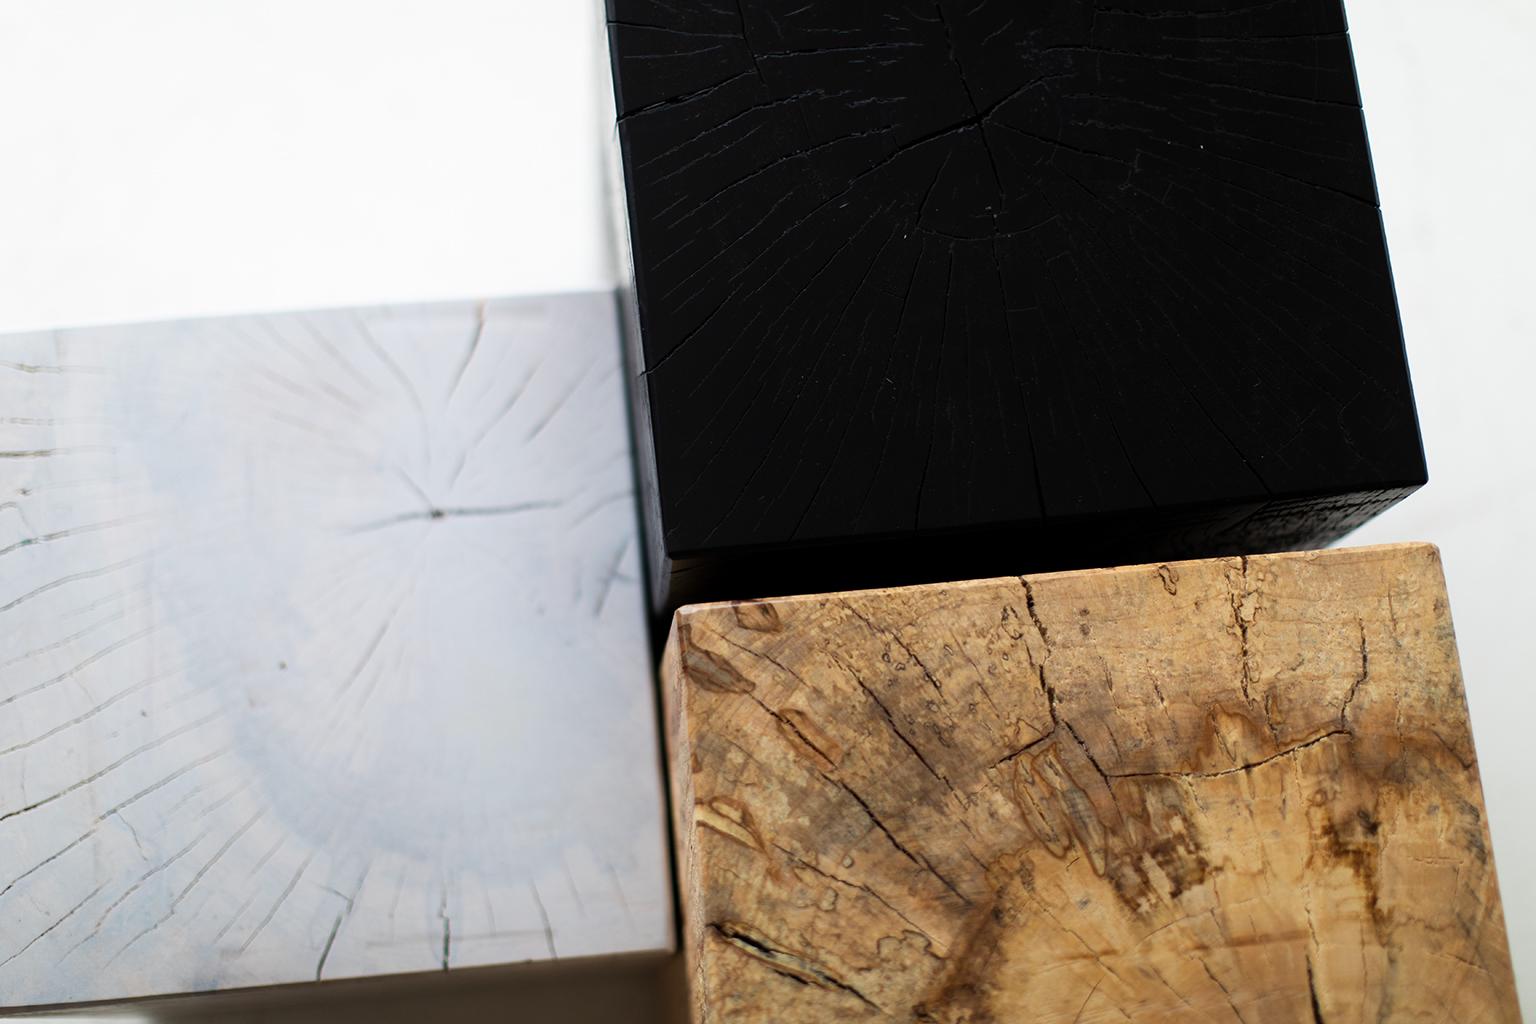 Bertu wood side tables, white black natural square wood side tables

Please specify if you'd like black, whitewash or natural when ordering.

Why buy our stumps?

Kiln Dried
Our stumps all go through a drying process in our kiln, sometimes